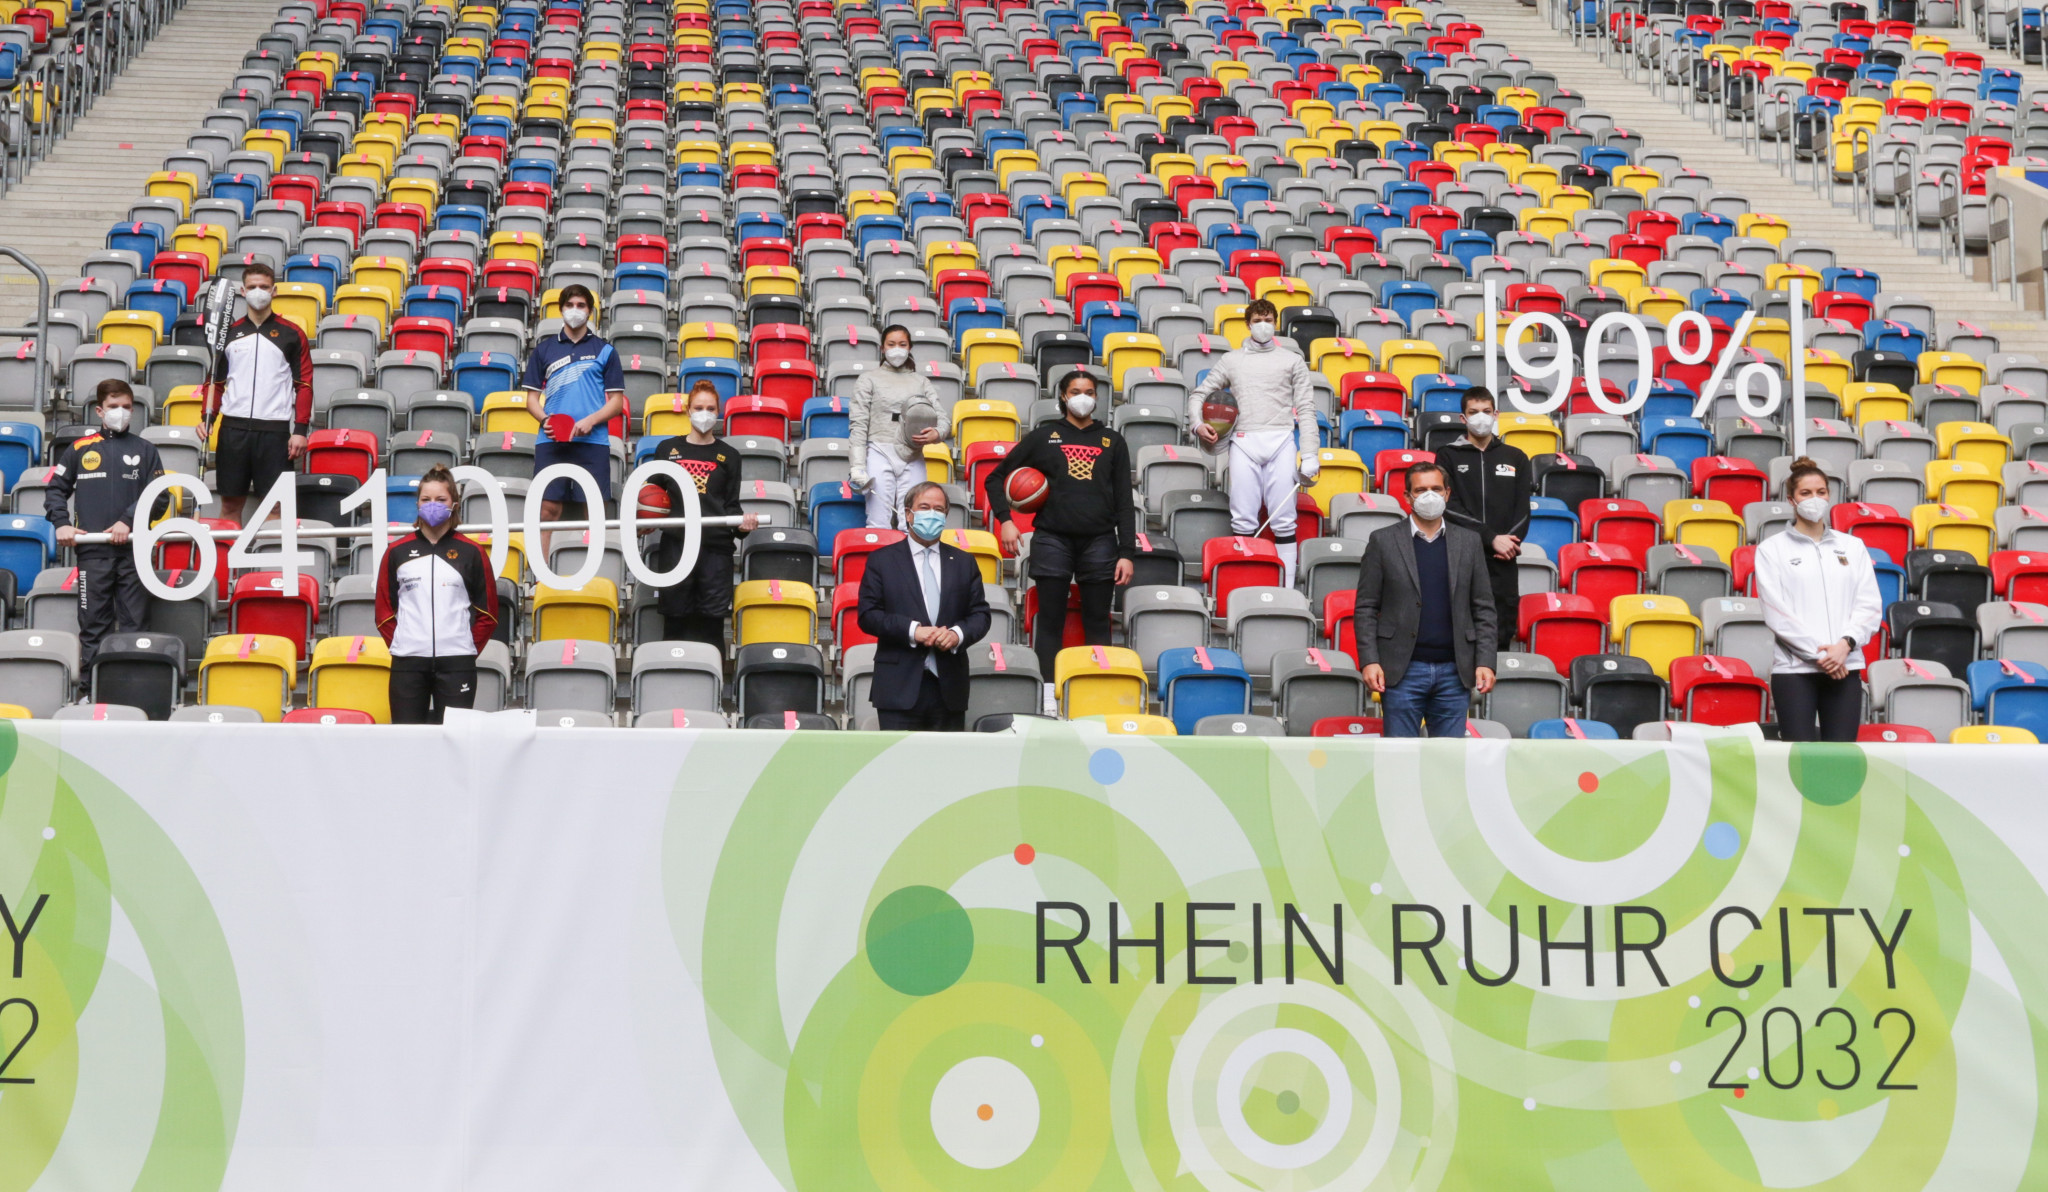 A Rhine-Ruhr 2032 event was held today despite Brisbane being installed as the preferred bidder ©Getty Images